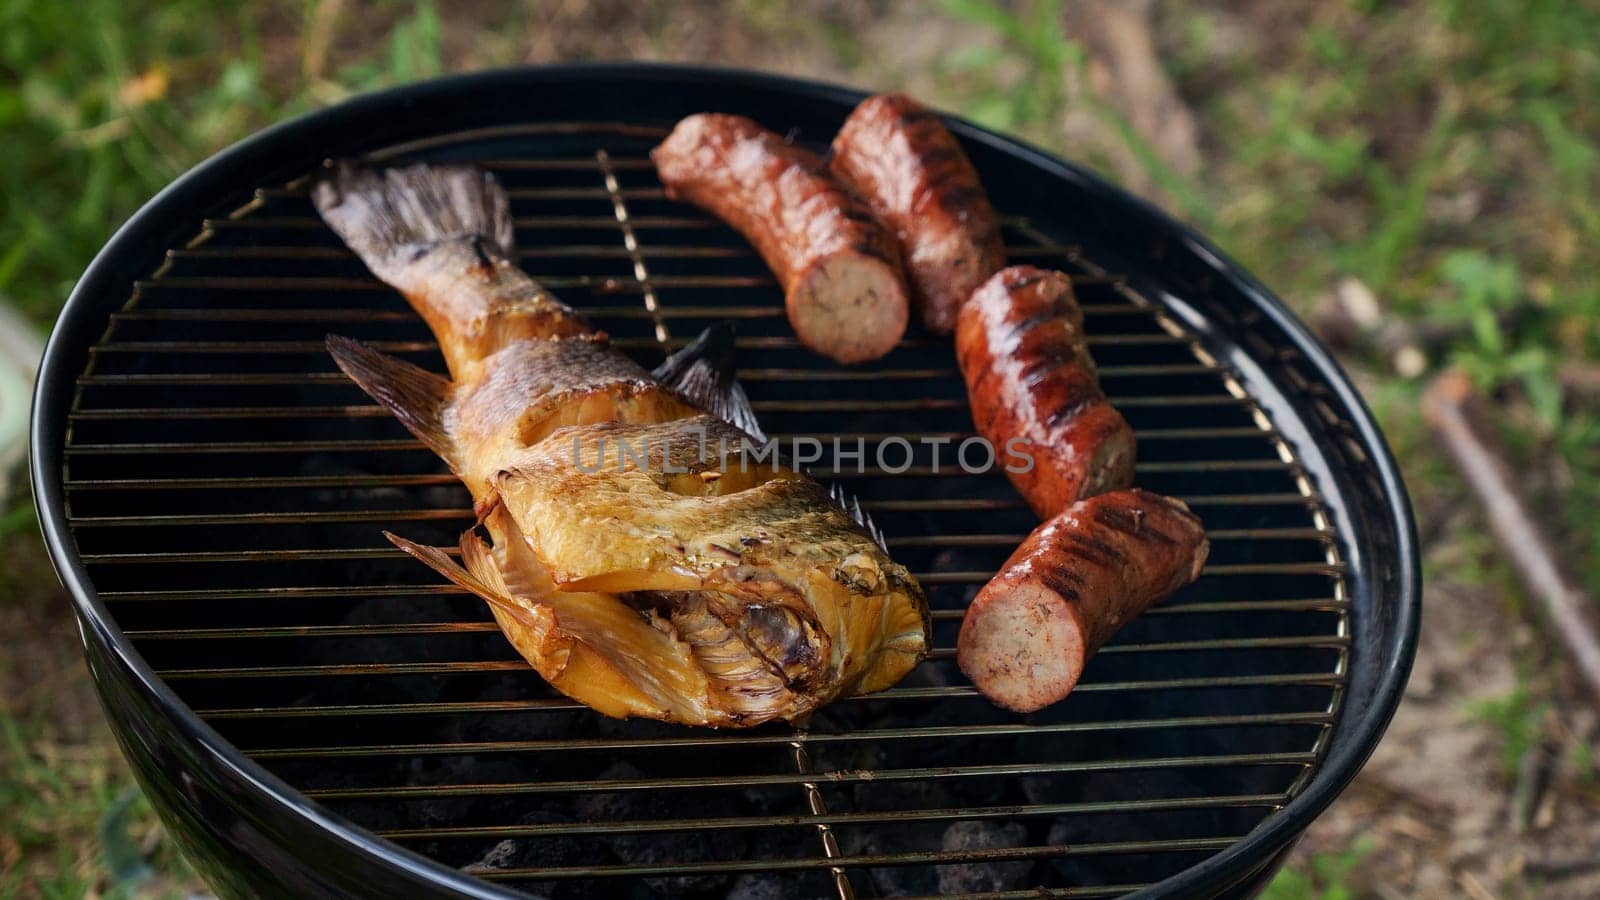 Top view of fresh grilled whole fish, skewer, sausages on round black charcoal grill, green grass background. Barbecue, grill and food concept. Camping with family